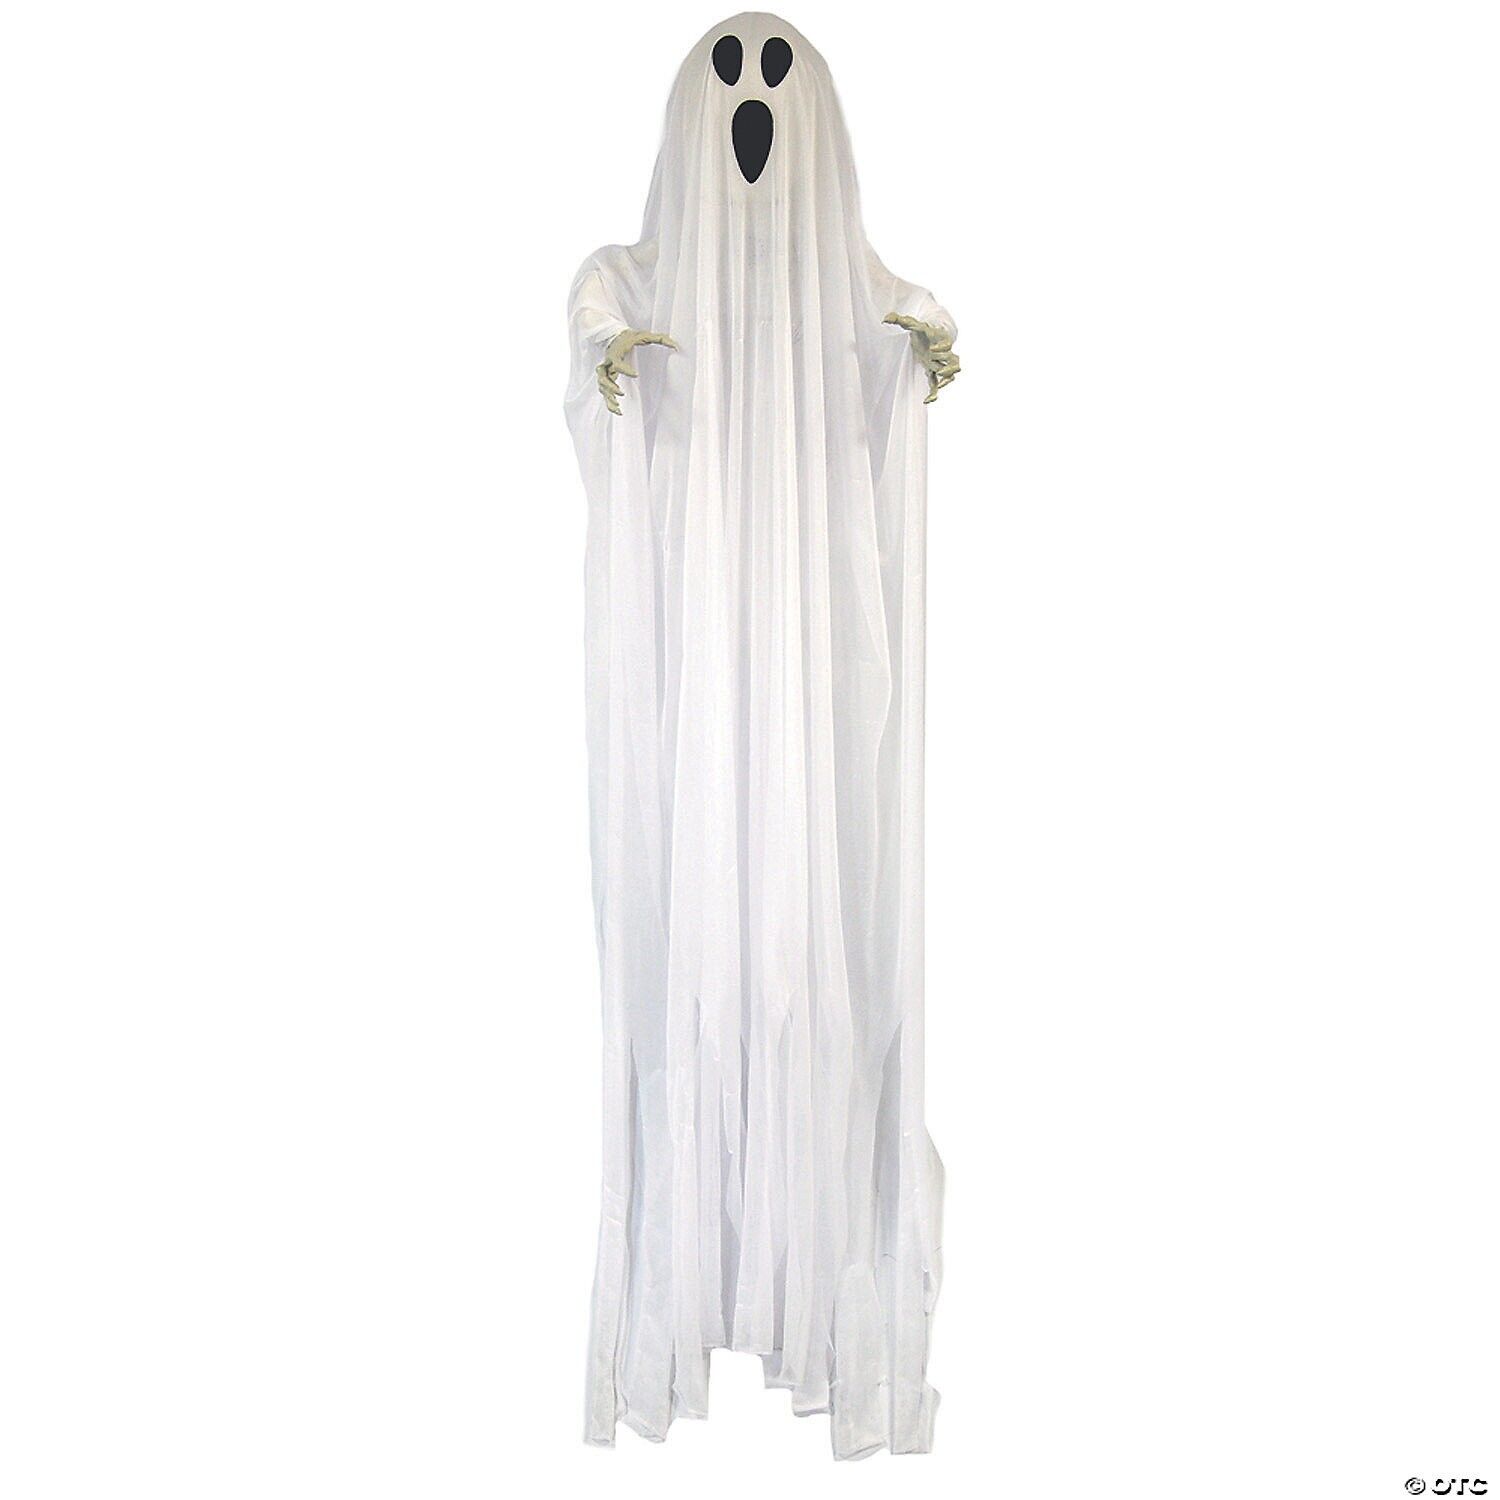 Shaking Ghost 5ft. Halloween Decoration